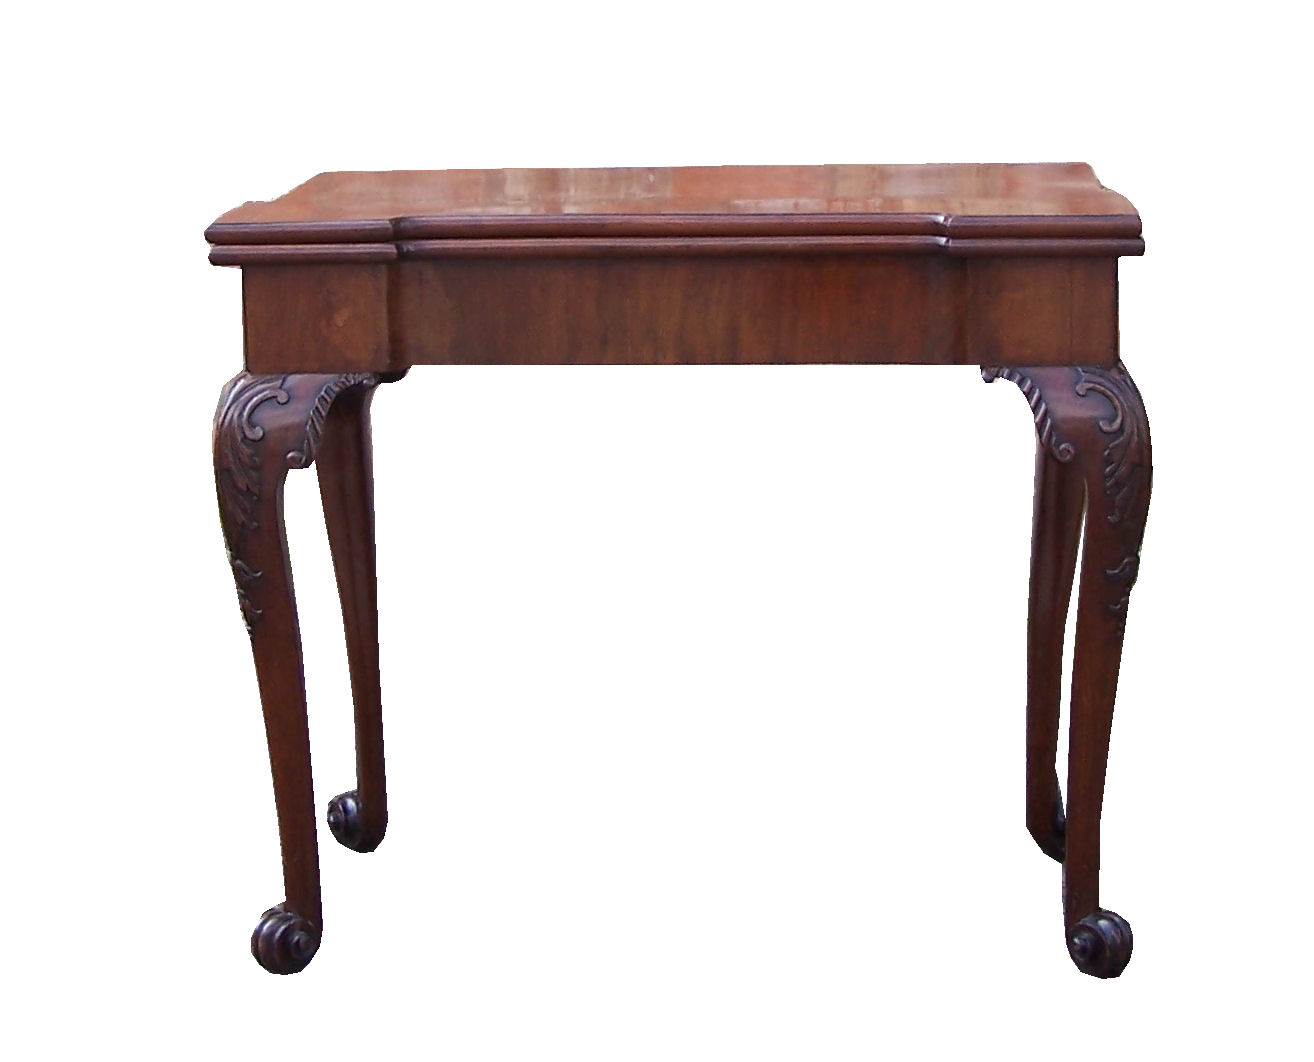 A late 18th century mahogany Card Table with fold-over oblong top, the interior baize lined and with